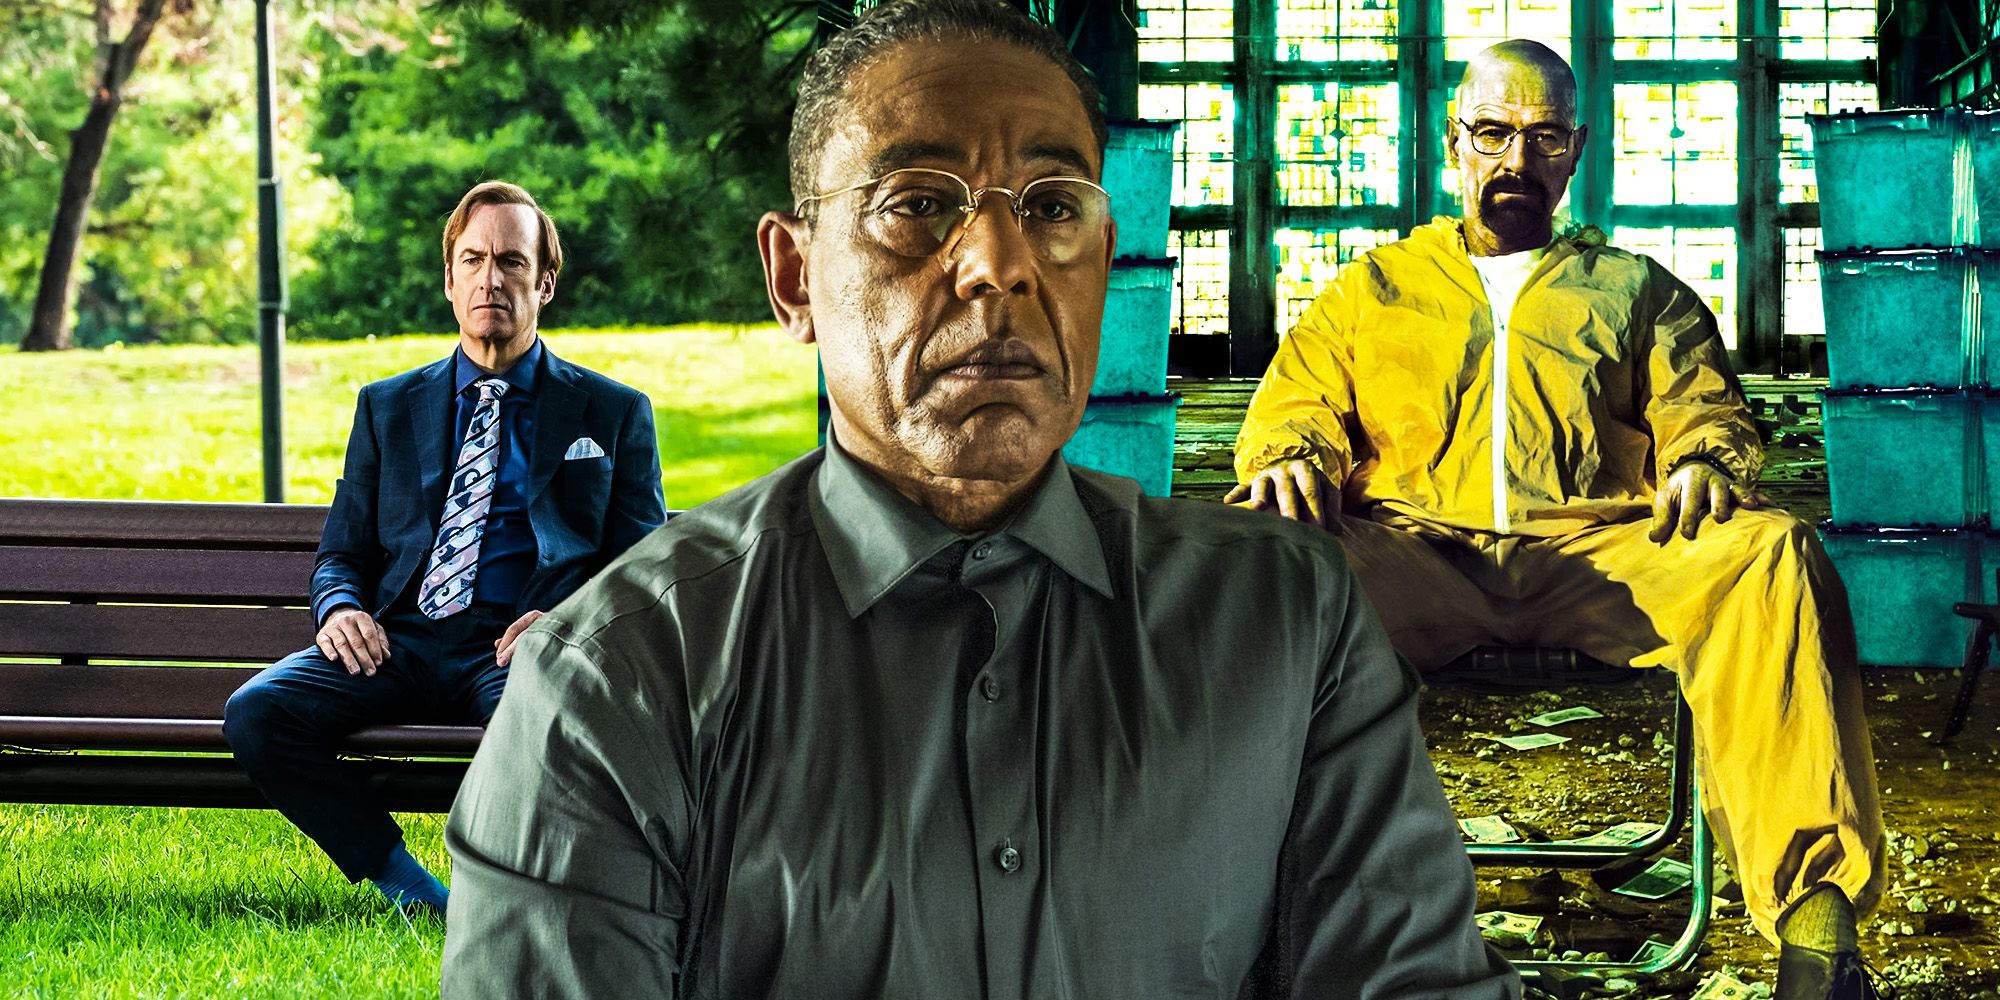 Gus Fring backstory tease set up breaking bad next spinoff better call saul